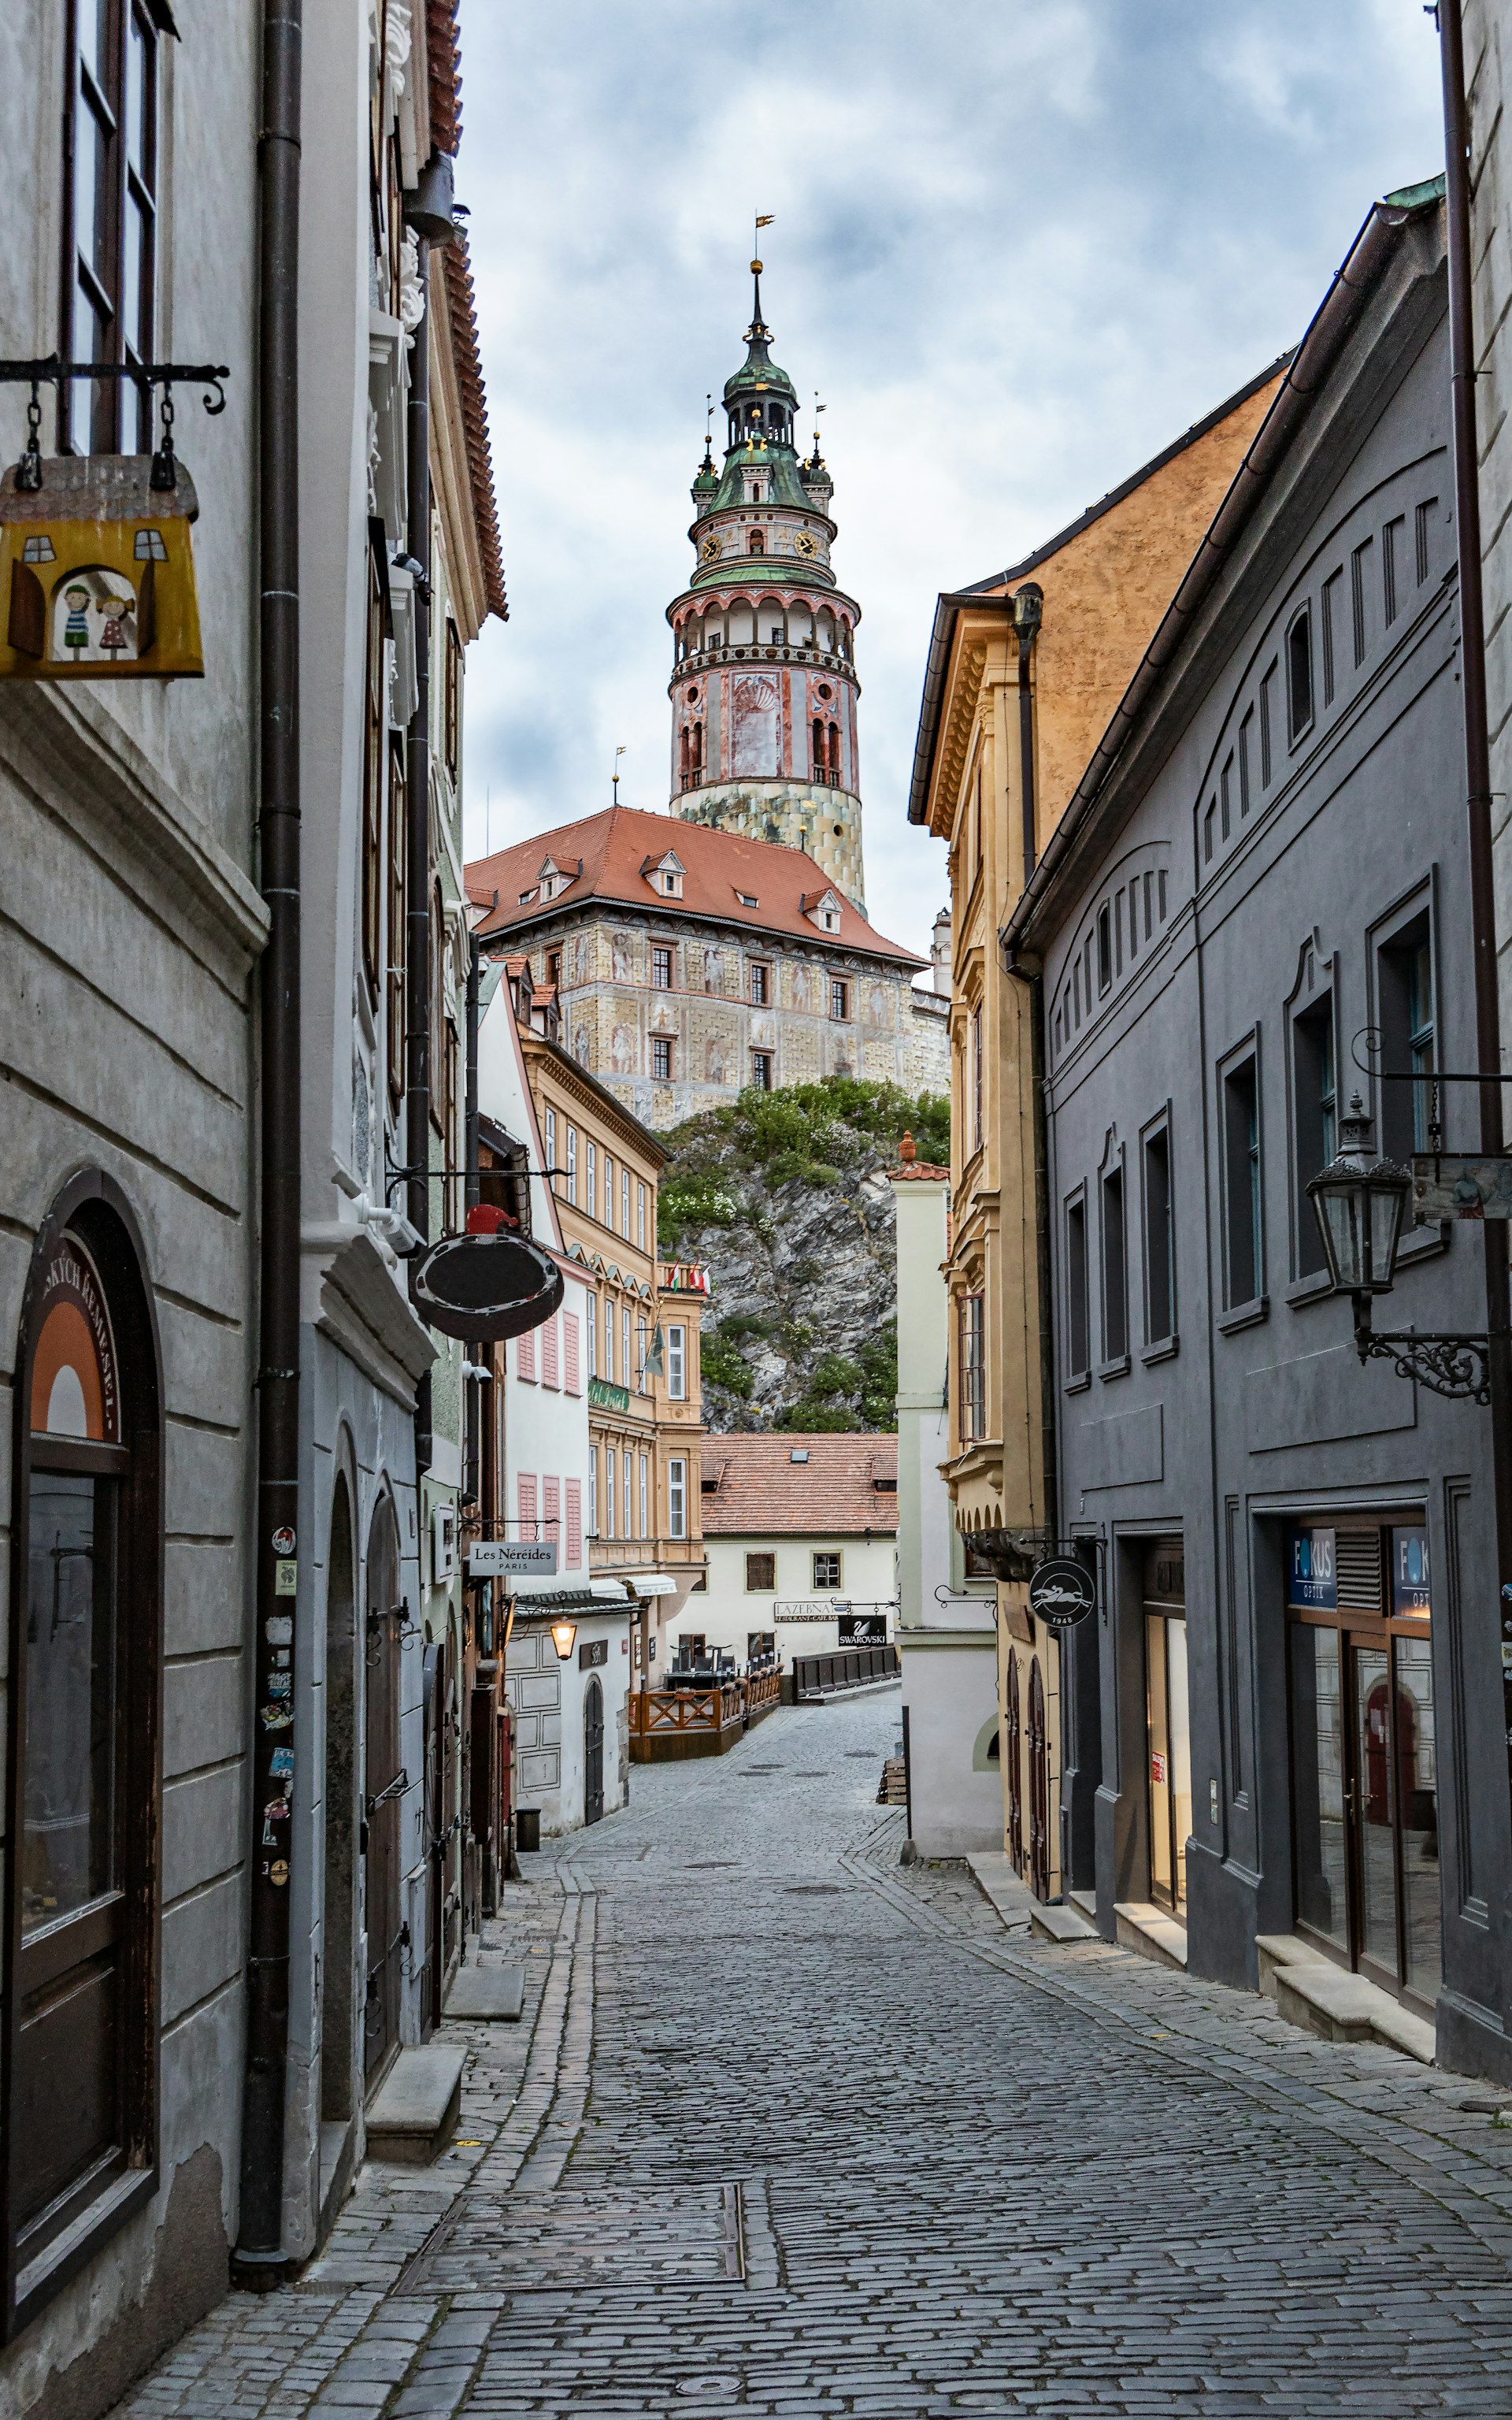 View of the Tower of the Krumlov castle from narrow street in Prague city centre